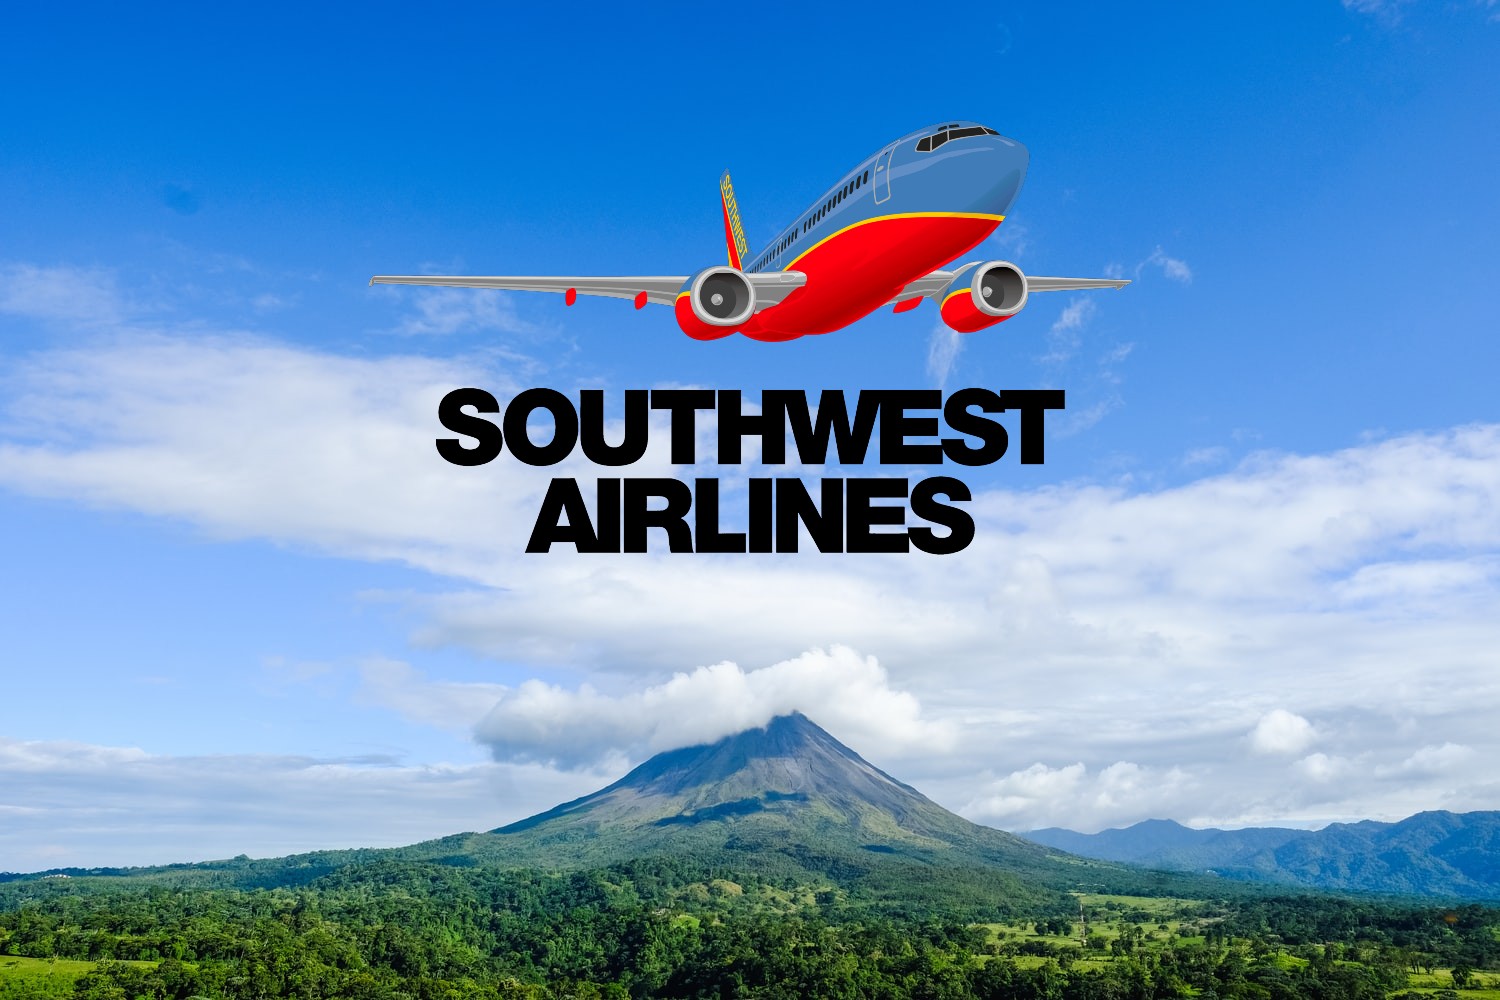 Costa Rica volcano and Southwest Airlines logo on top